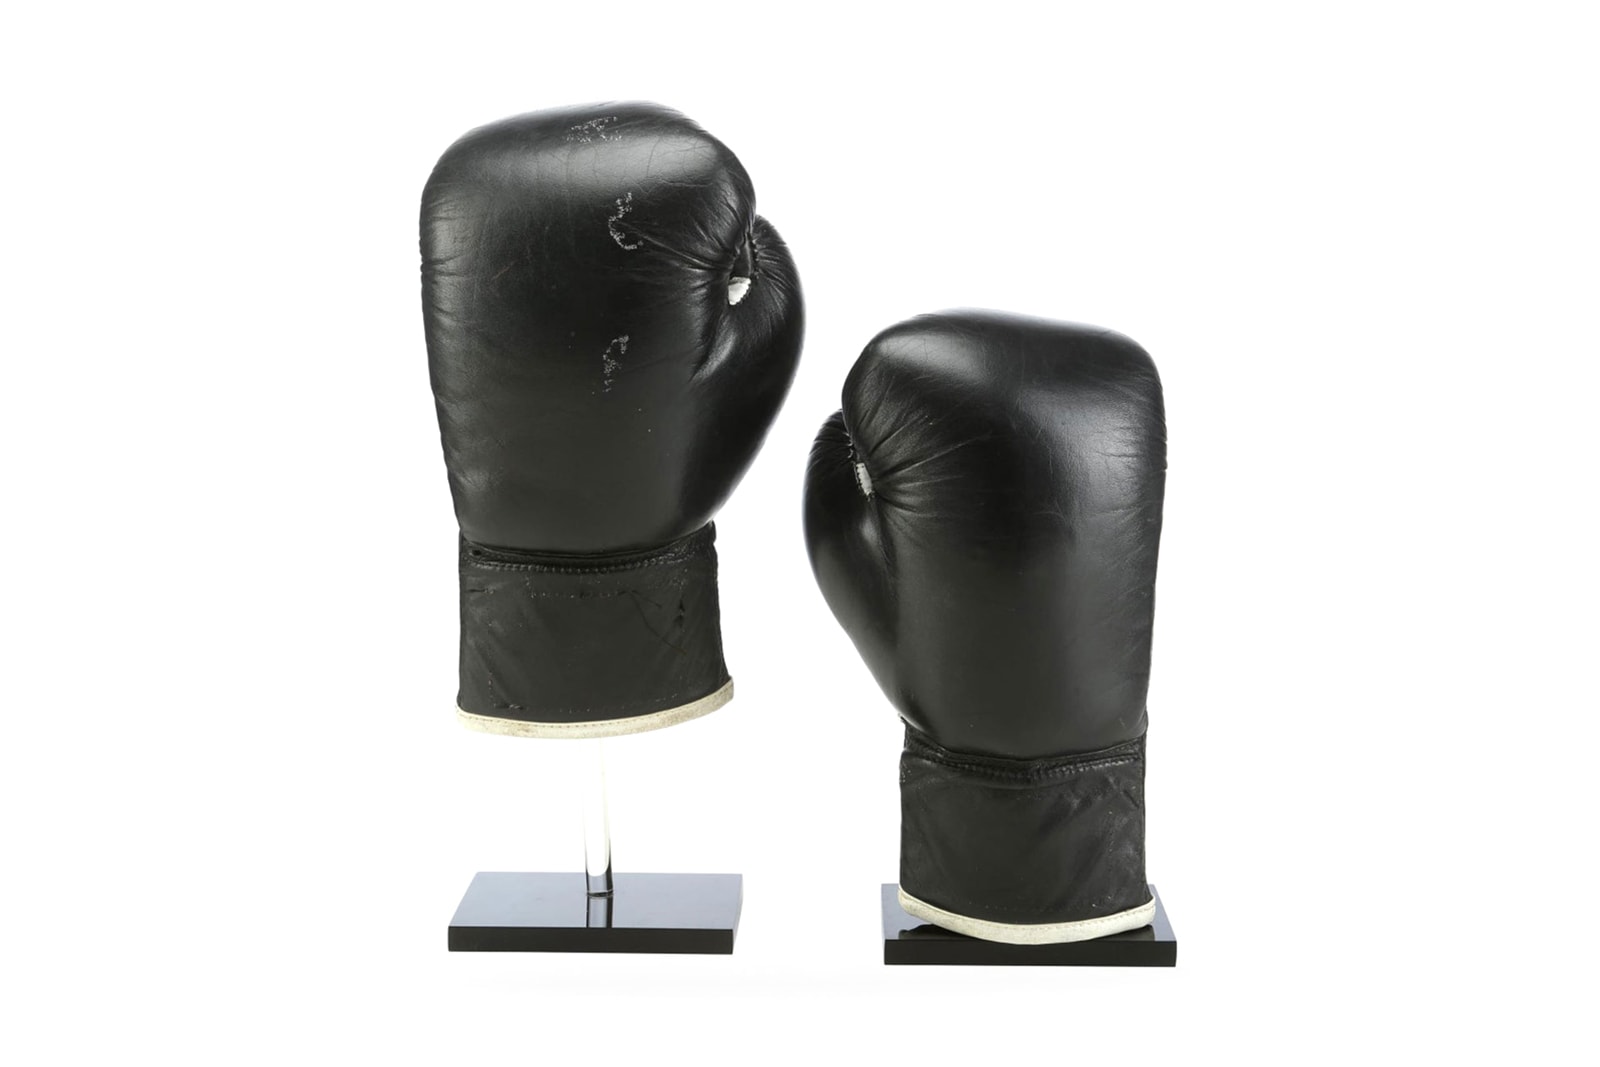 Sylvester Stallone Rocky Boxing Gloves Auction